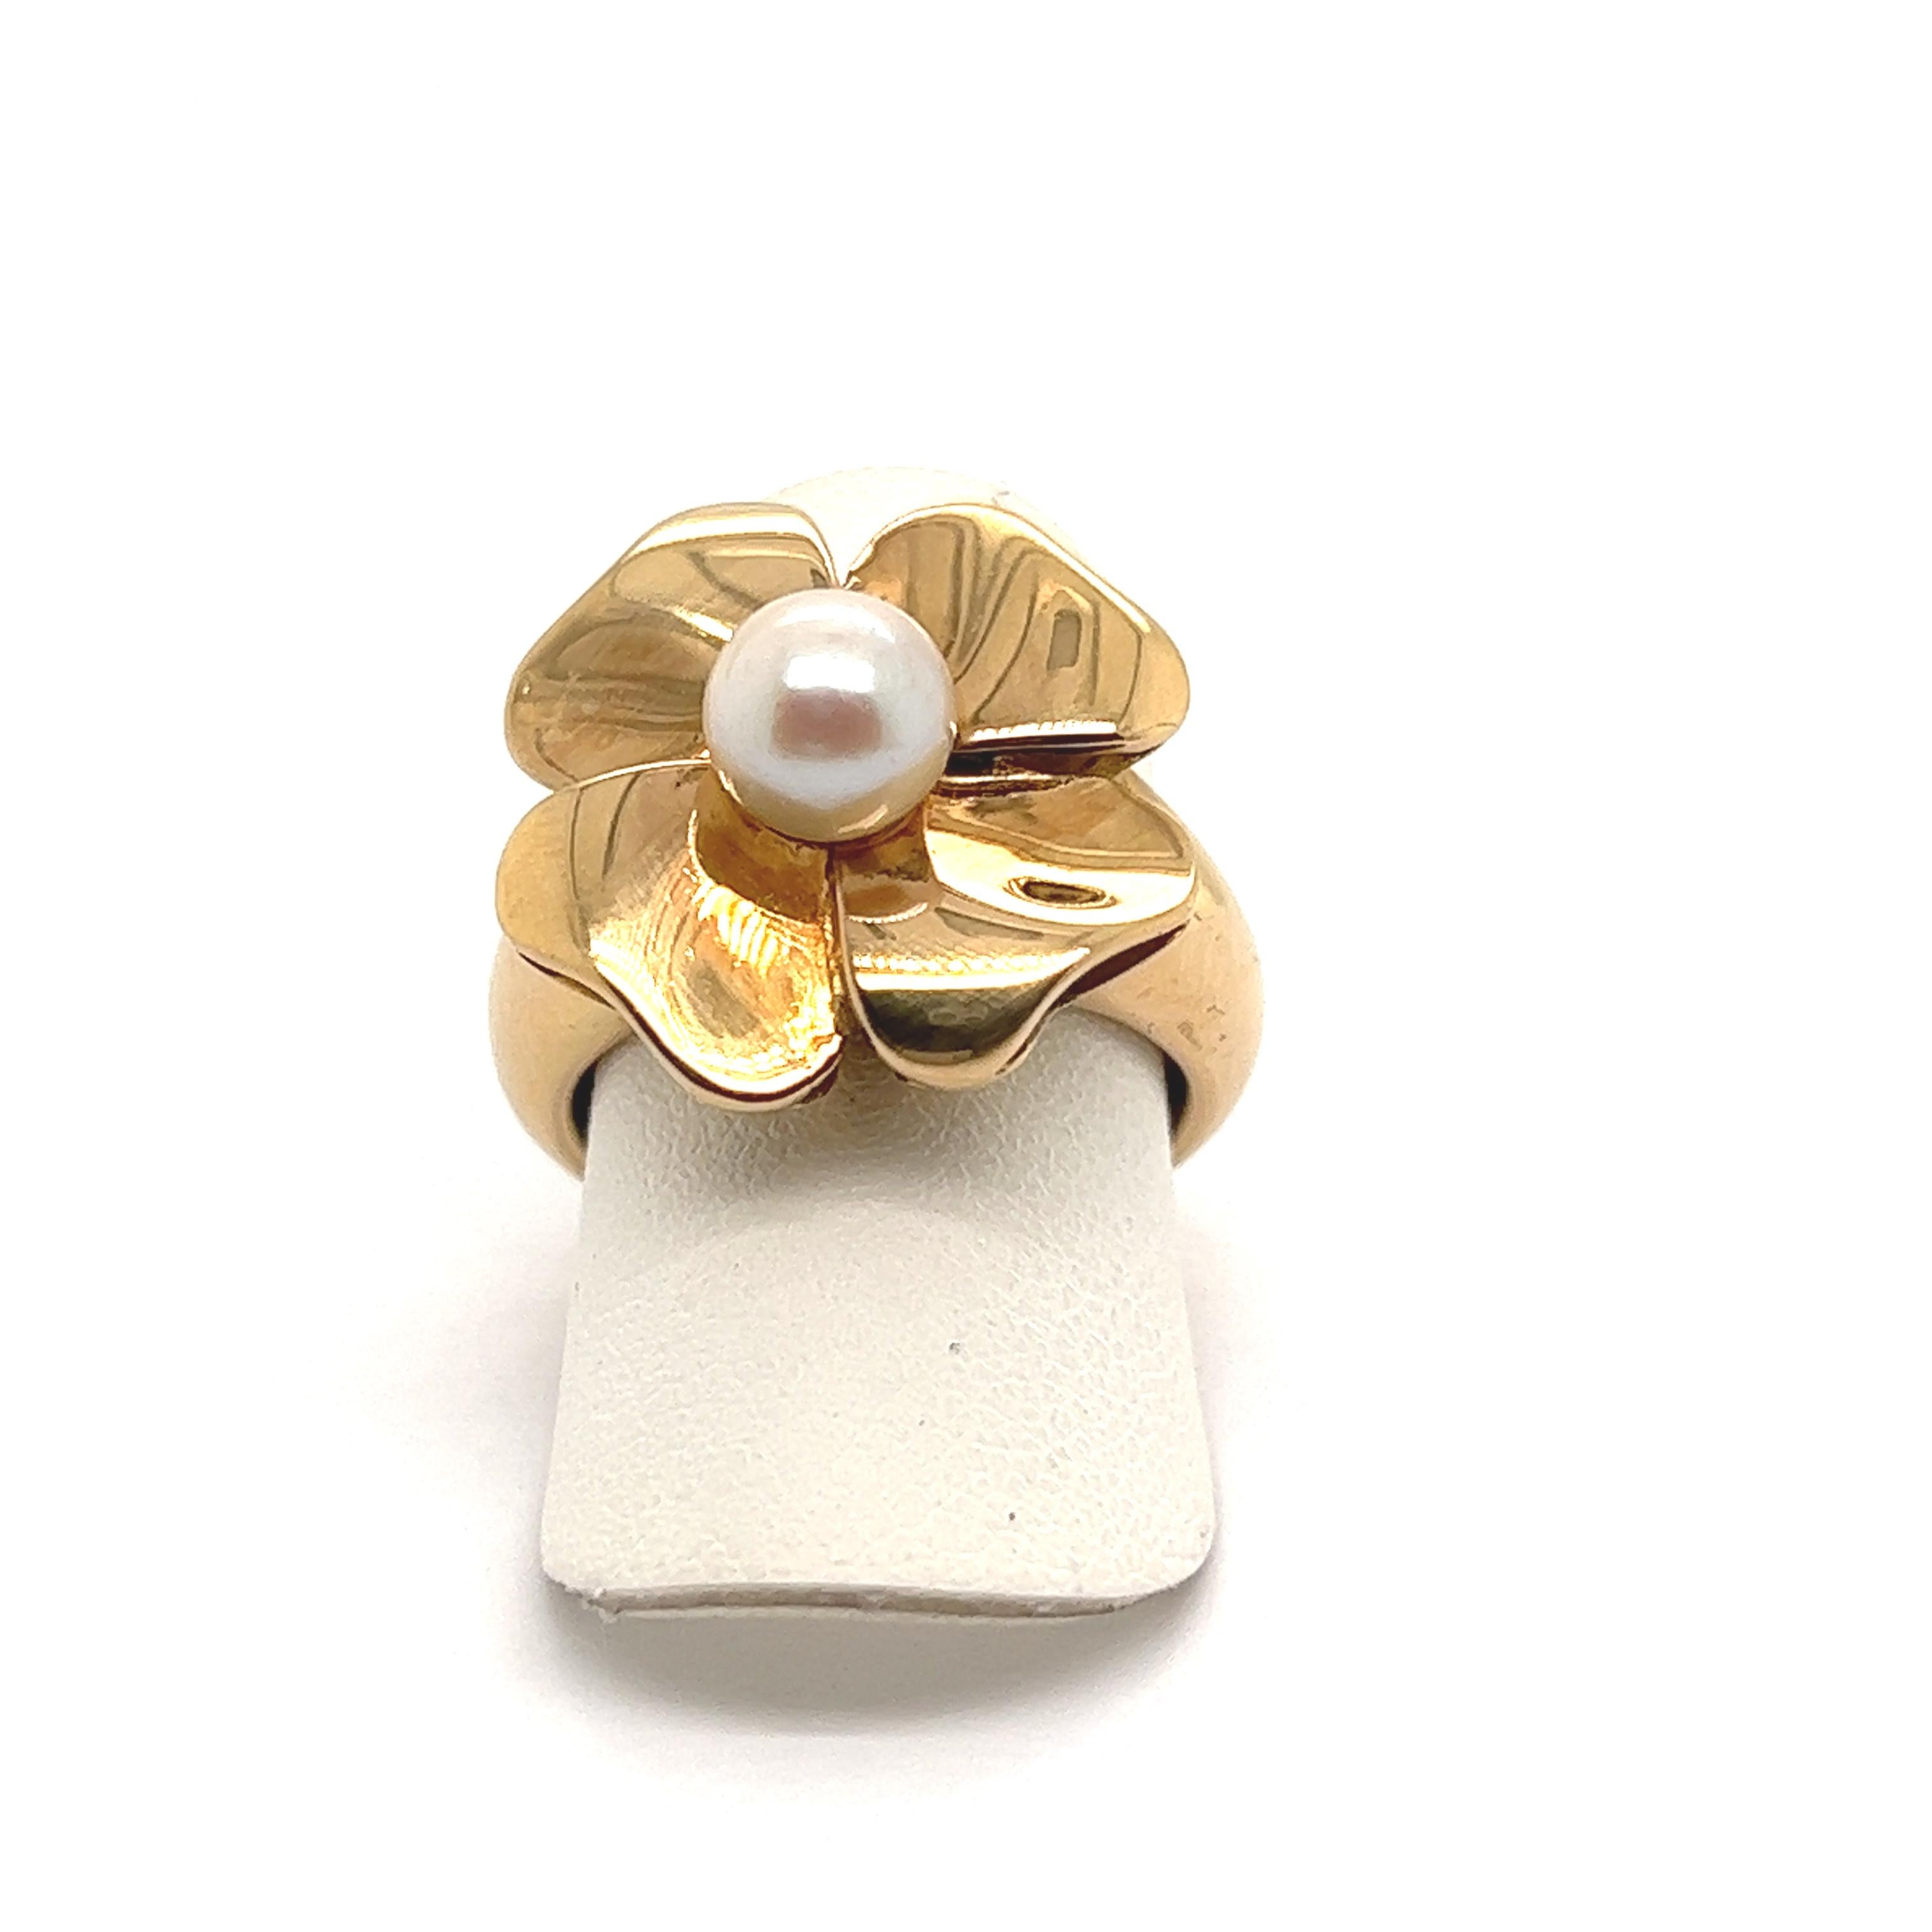 Vintage Cocktail Ring Flower Yellow Gold with Cultured Pearl.

This pretty ring from the 1980s represents a flower or a 4-leaf clover surmounted by a cultured pearl. Its reed-shaped body covers the finger well. This Vintage jewelry will seduce you